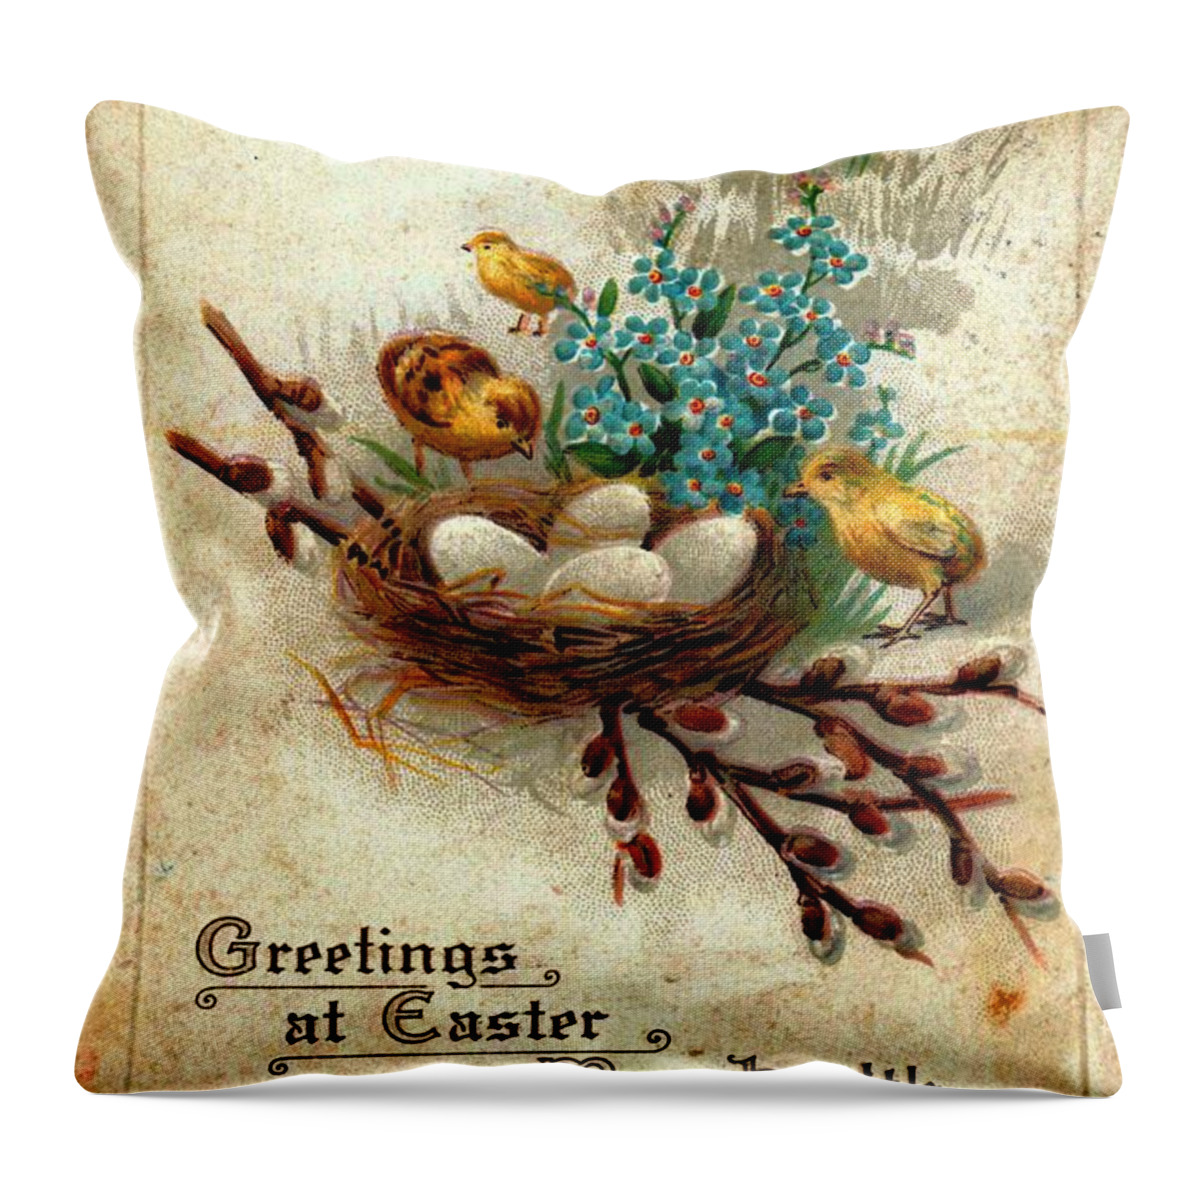 Greetings Throw Pillow featuring the photograph Greetings at Easter 1918 Vintage Postcard by Audreen Gieger